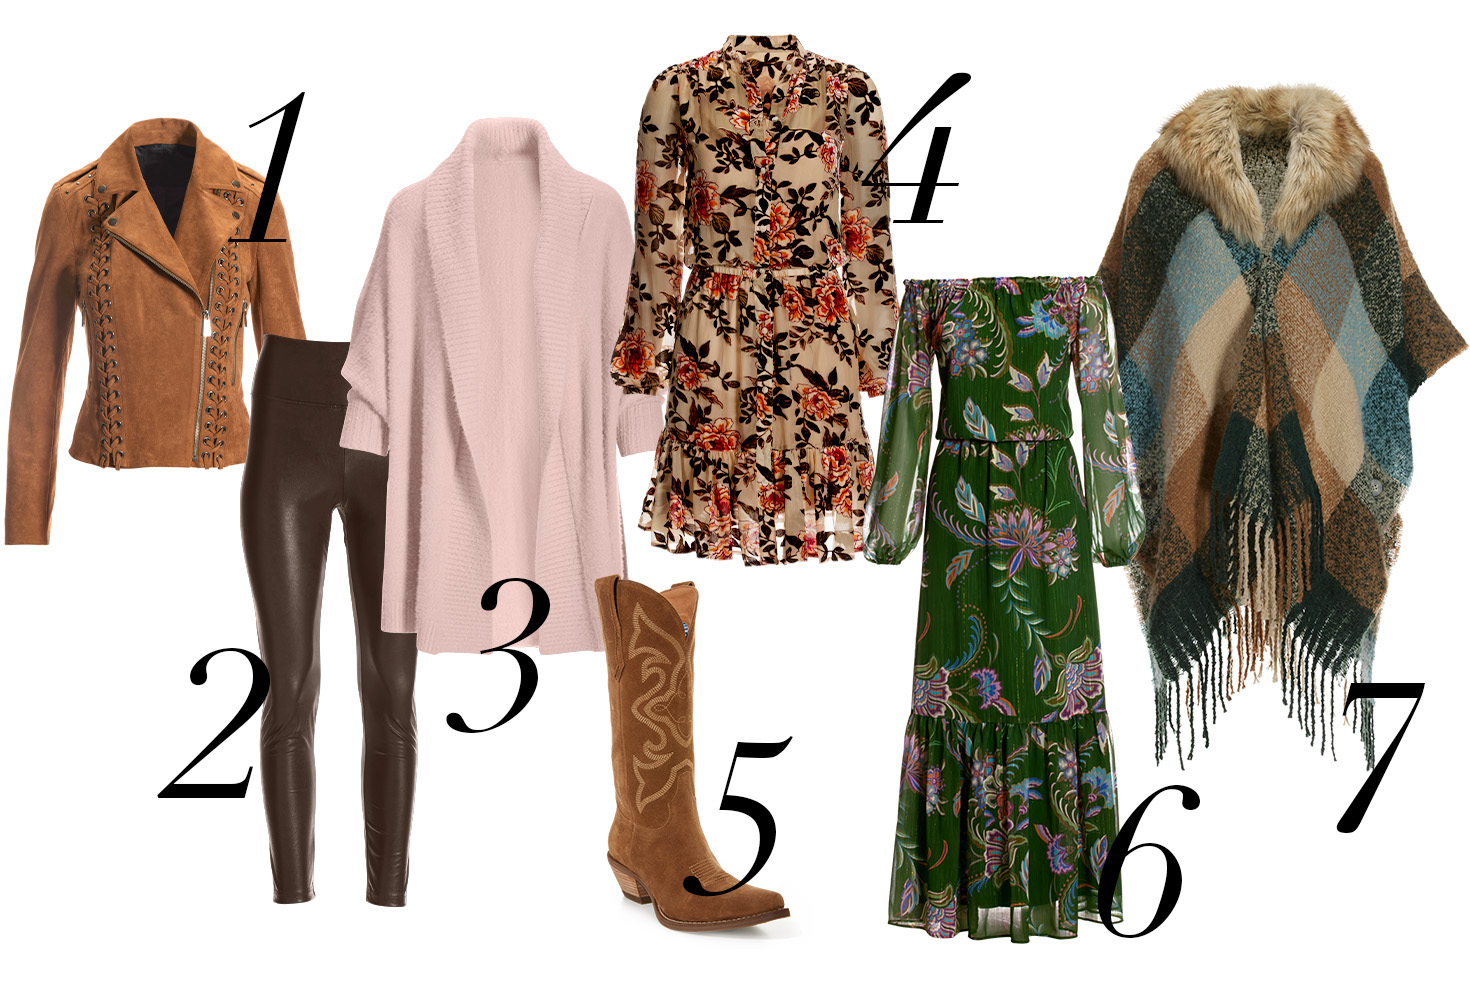 1. brown suede jacket. 2. brown faux-leather leggings. 3. light pink plush sweater cardigan. 4. multicolor floral long-sleeve short dress. 5. brown western boots. 6. green paisley print off-the-shoulder long-sleeve maxi dress. 7. plaid faux-fur poncho.